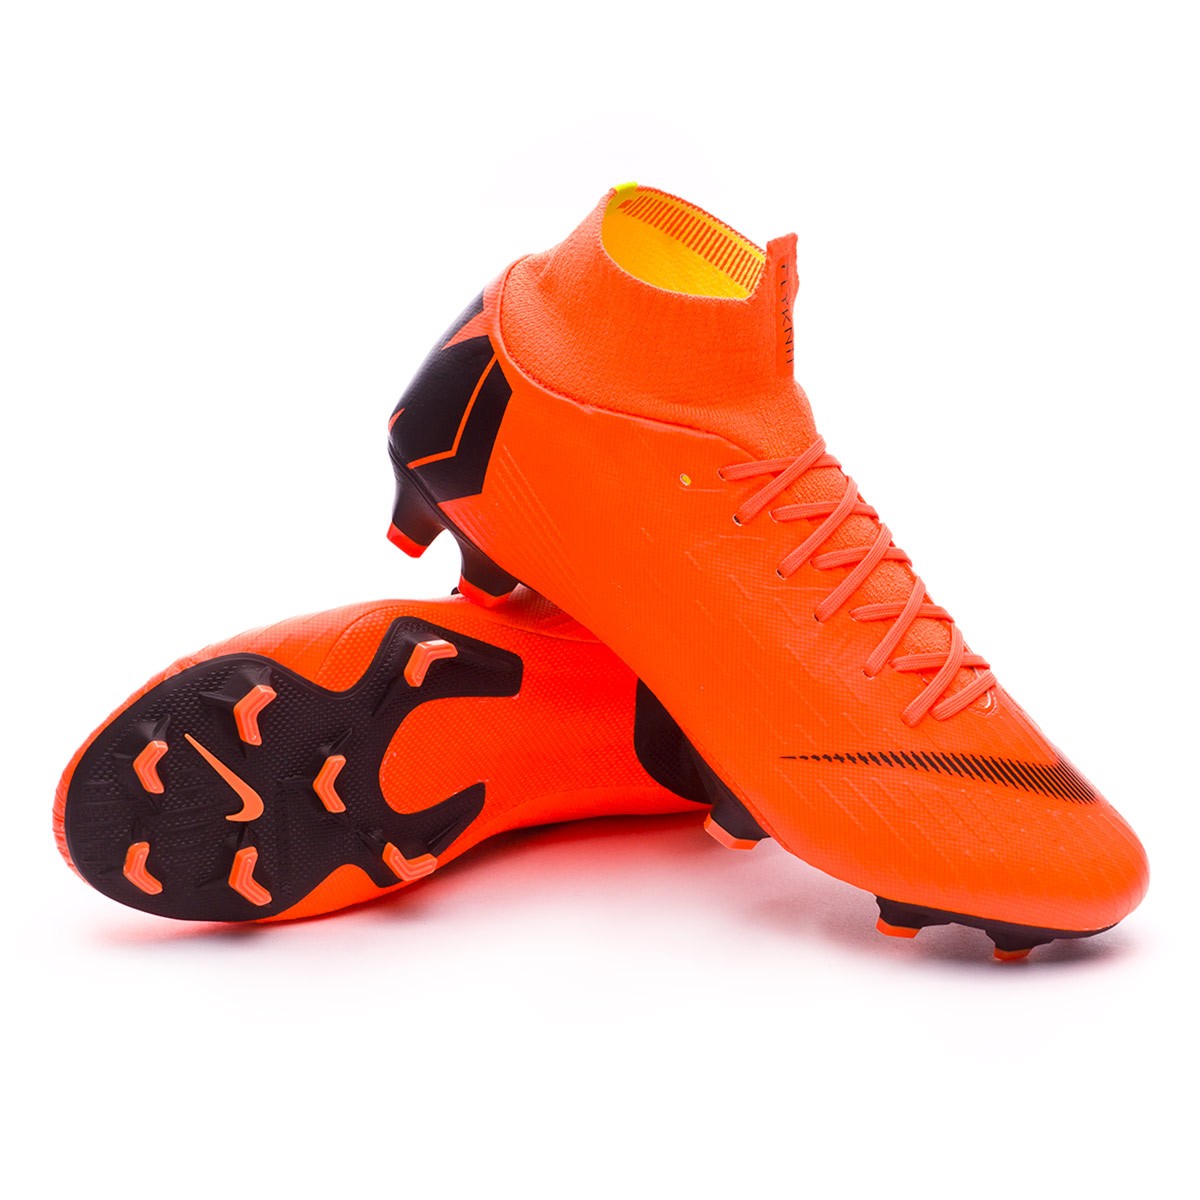 nike mercurial superfly 6 club mg soccer cleats review